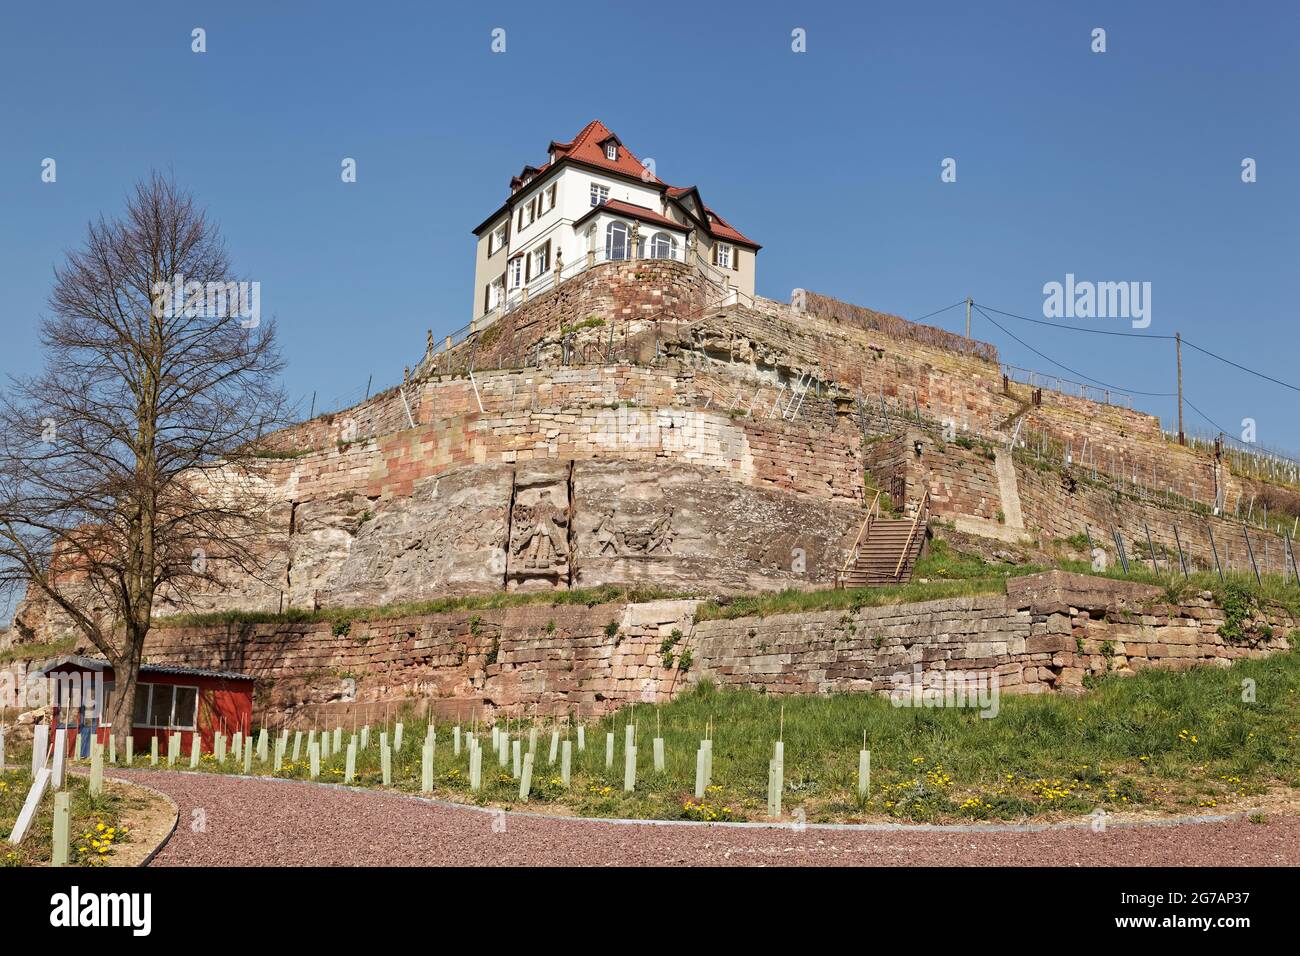 Stone picture book and vineyards in the flower base in the Naumburg district of Großjena, Burgenlandkreis, Saxony-Anhalt, Germany Stock Photo